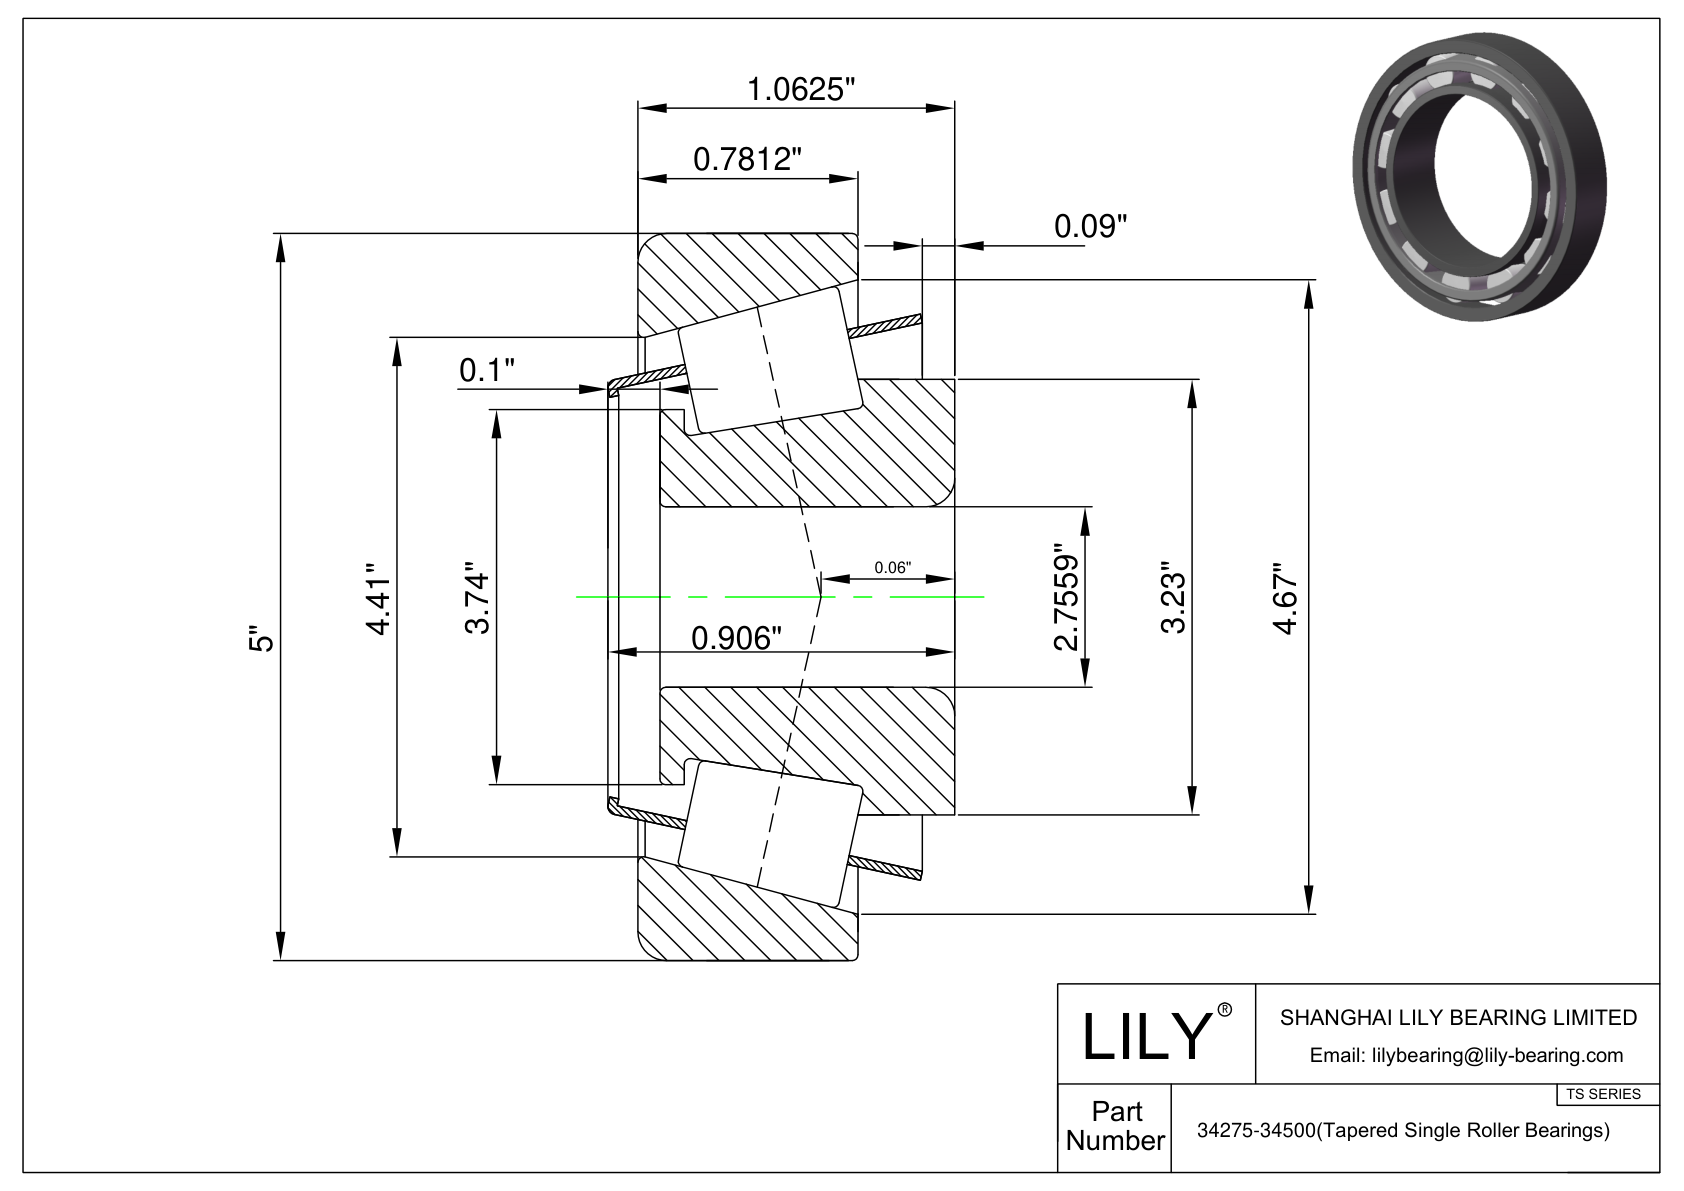 34275-34500 TS (Tapered Single Roller Bearings) (Imperial) cad drawing